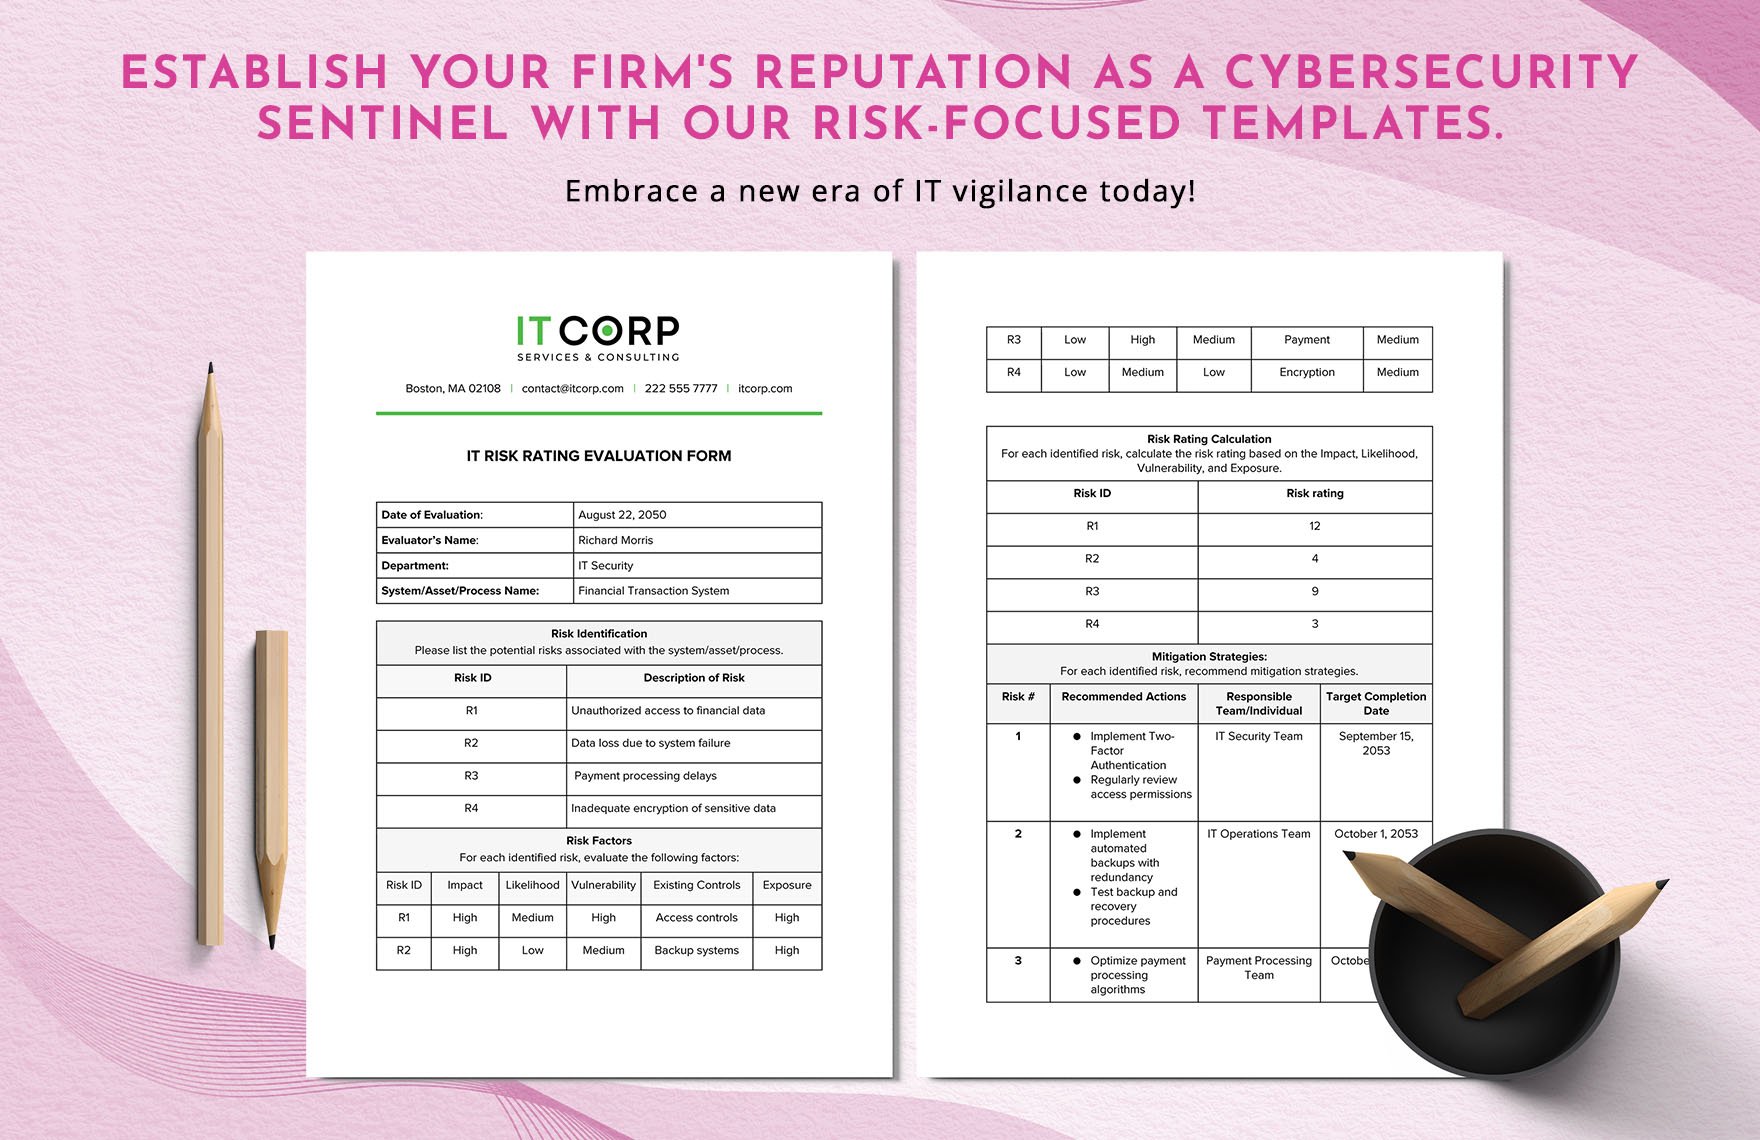 IT Risk Rating Evaluation Form Template